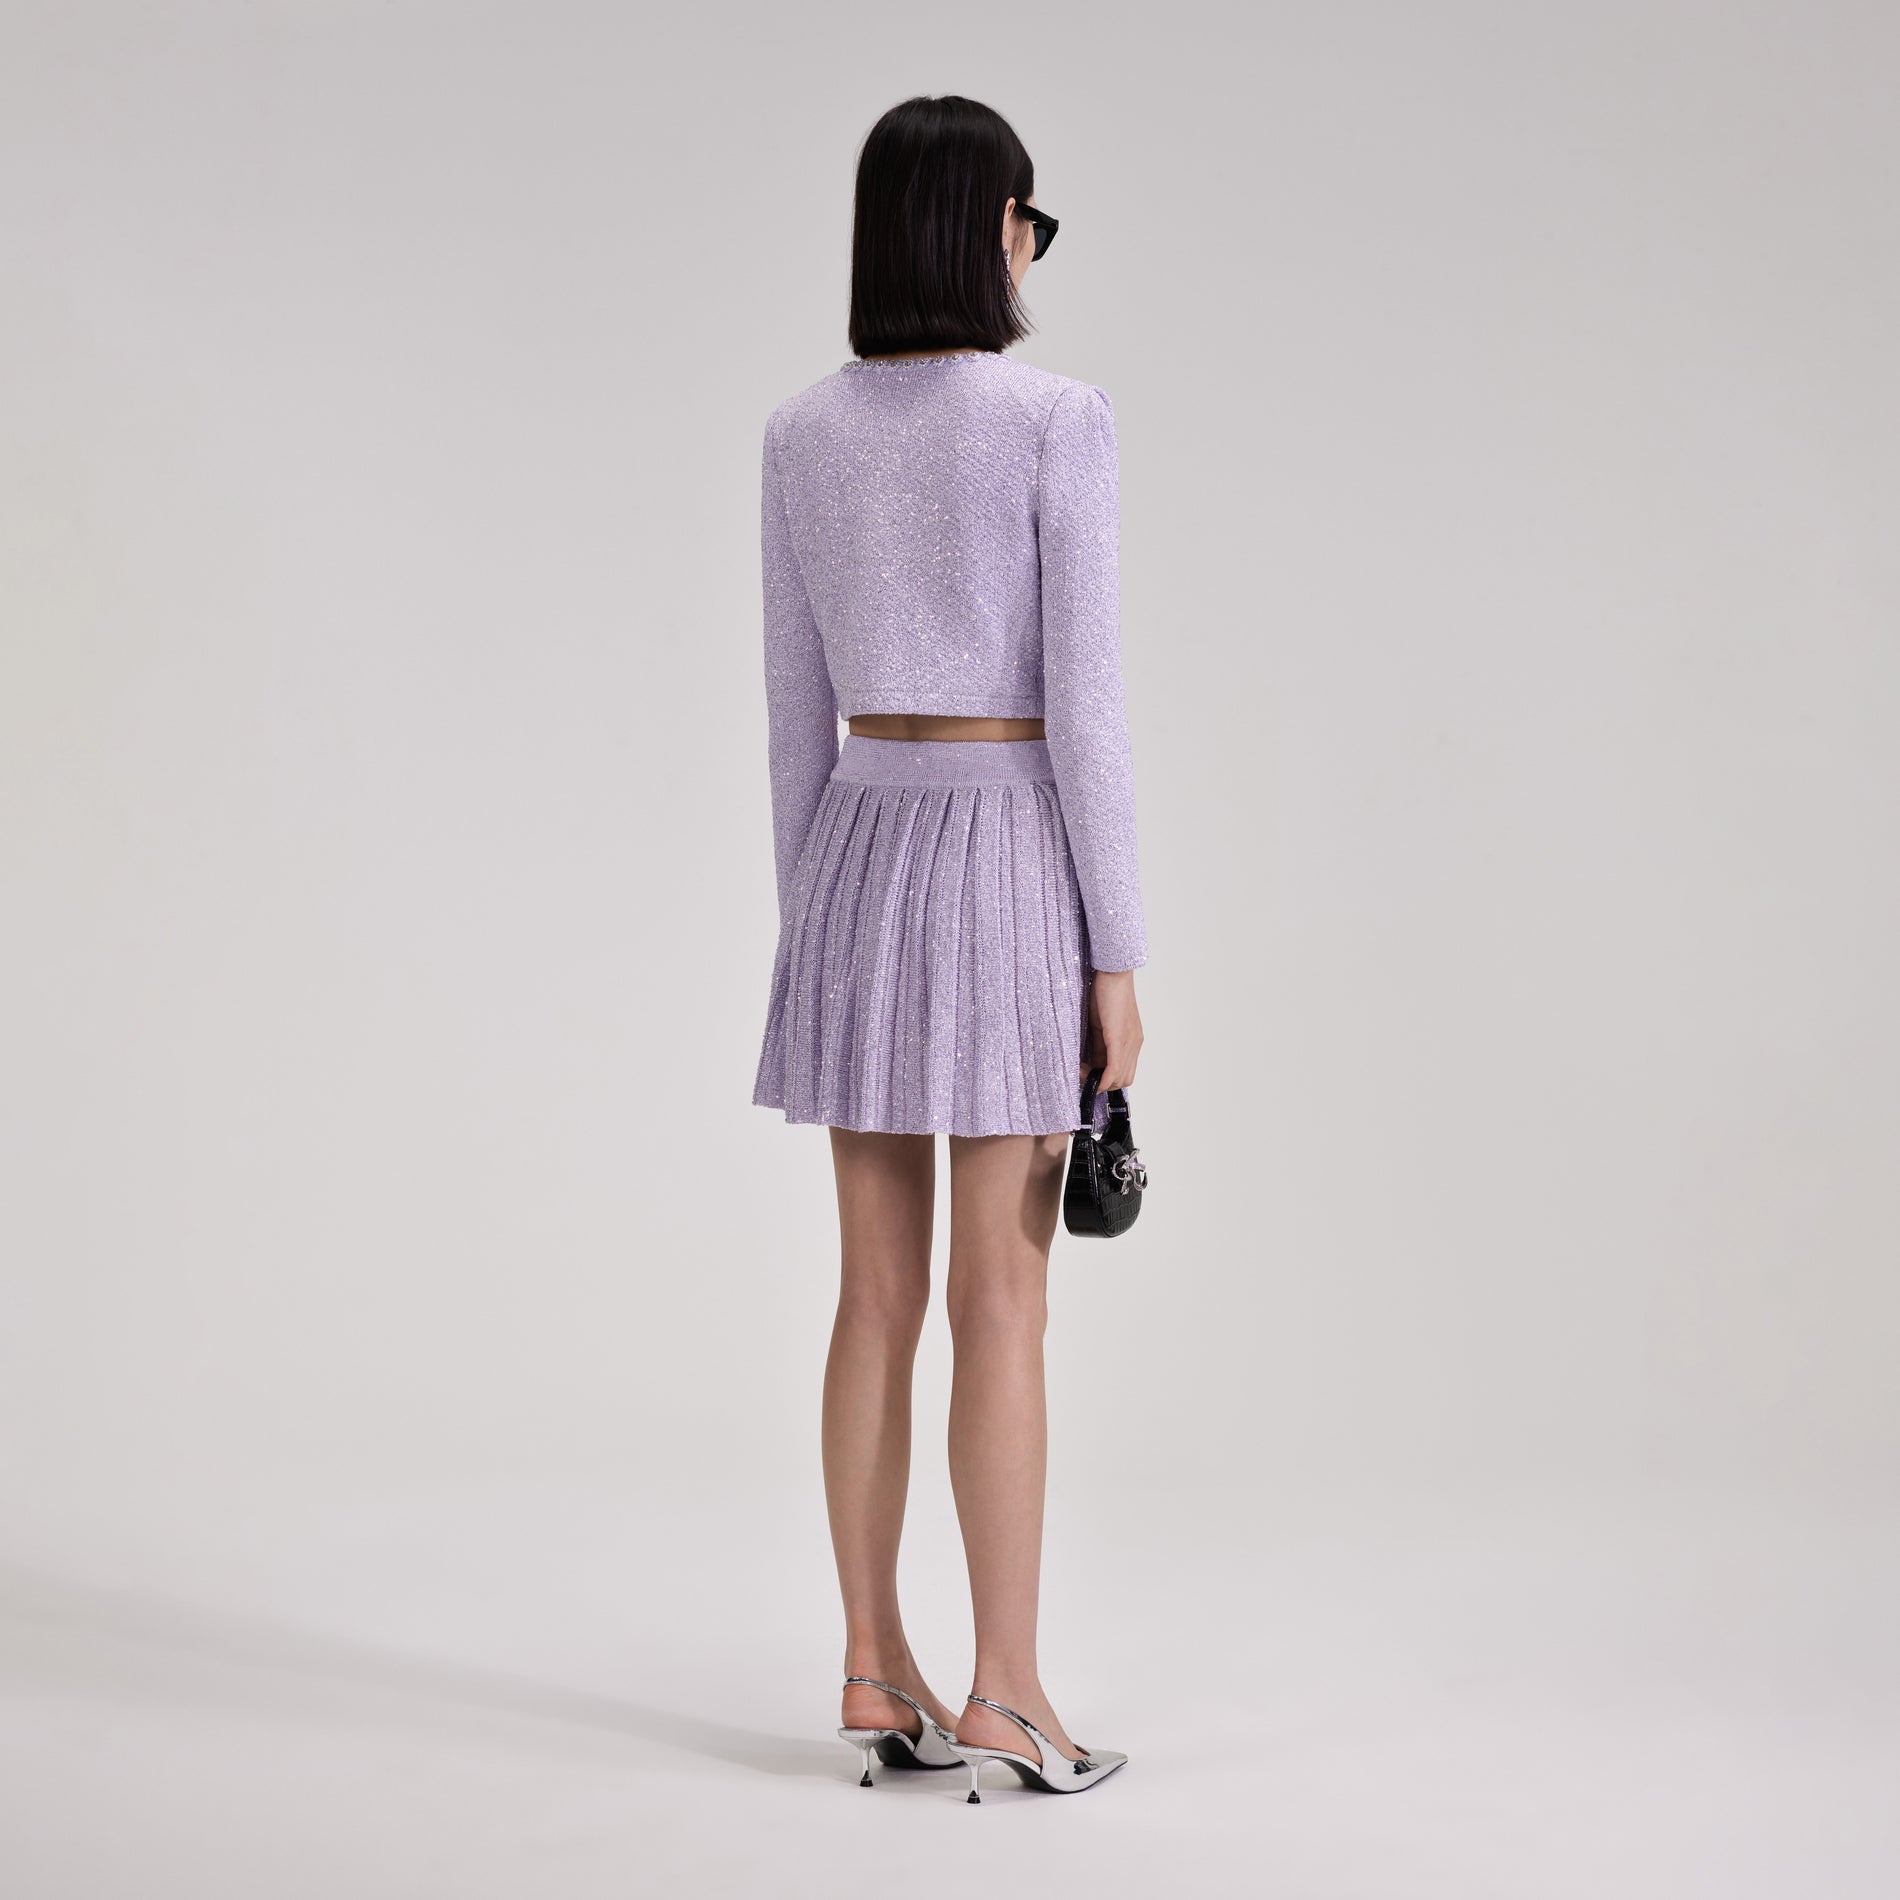 A woman wearing the Lilac Sequin Pleated Knit Skirt